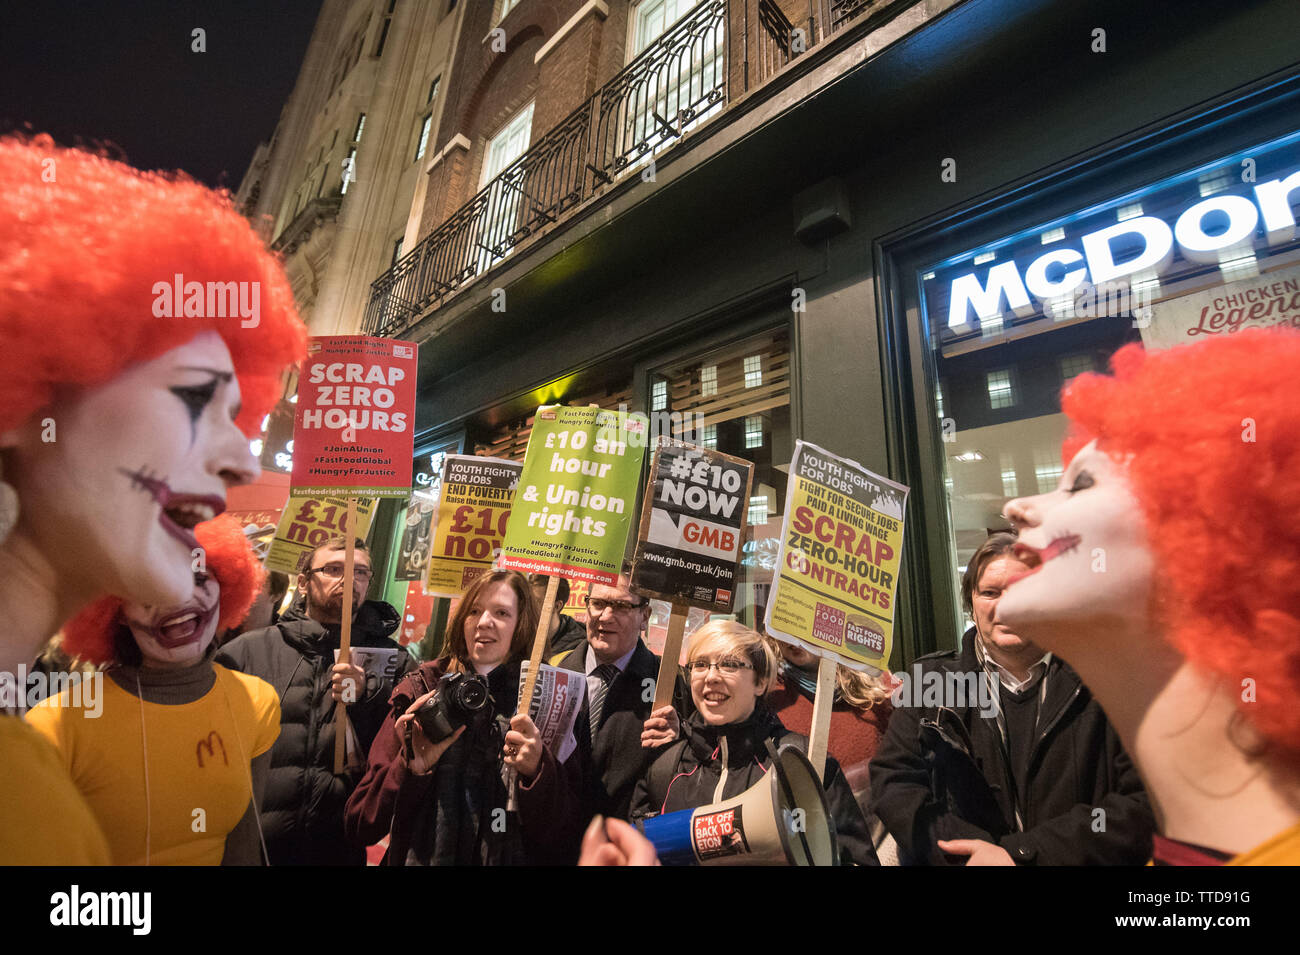 McDonald's Whitehall, London, UK. 13th January, 2016. London, UK. Activist group Fast Food Rights stage a protest outside McDonald's Whitehall branch Stock Photo